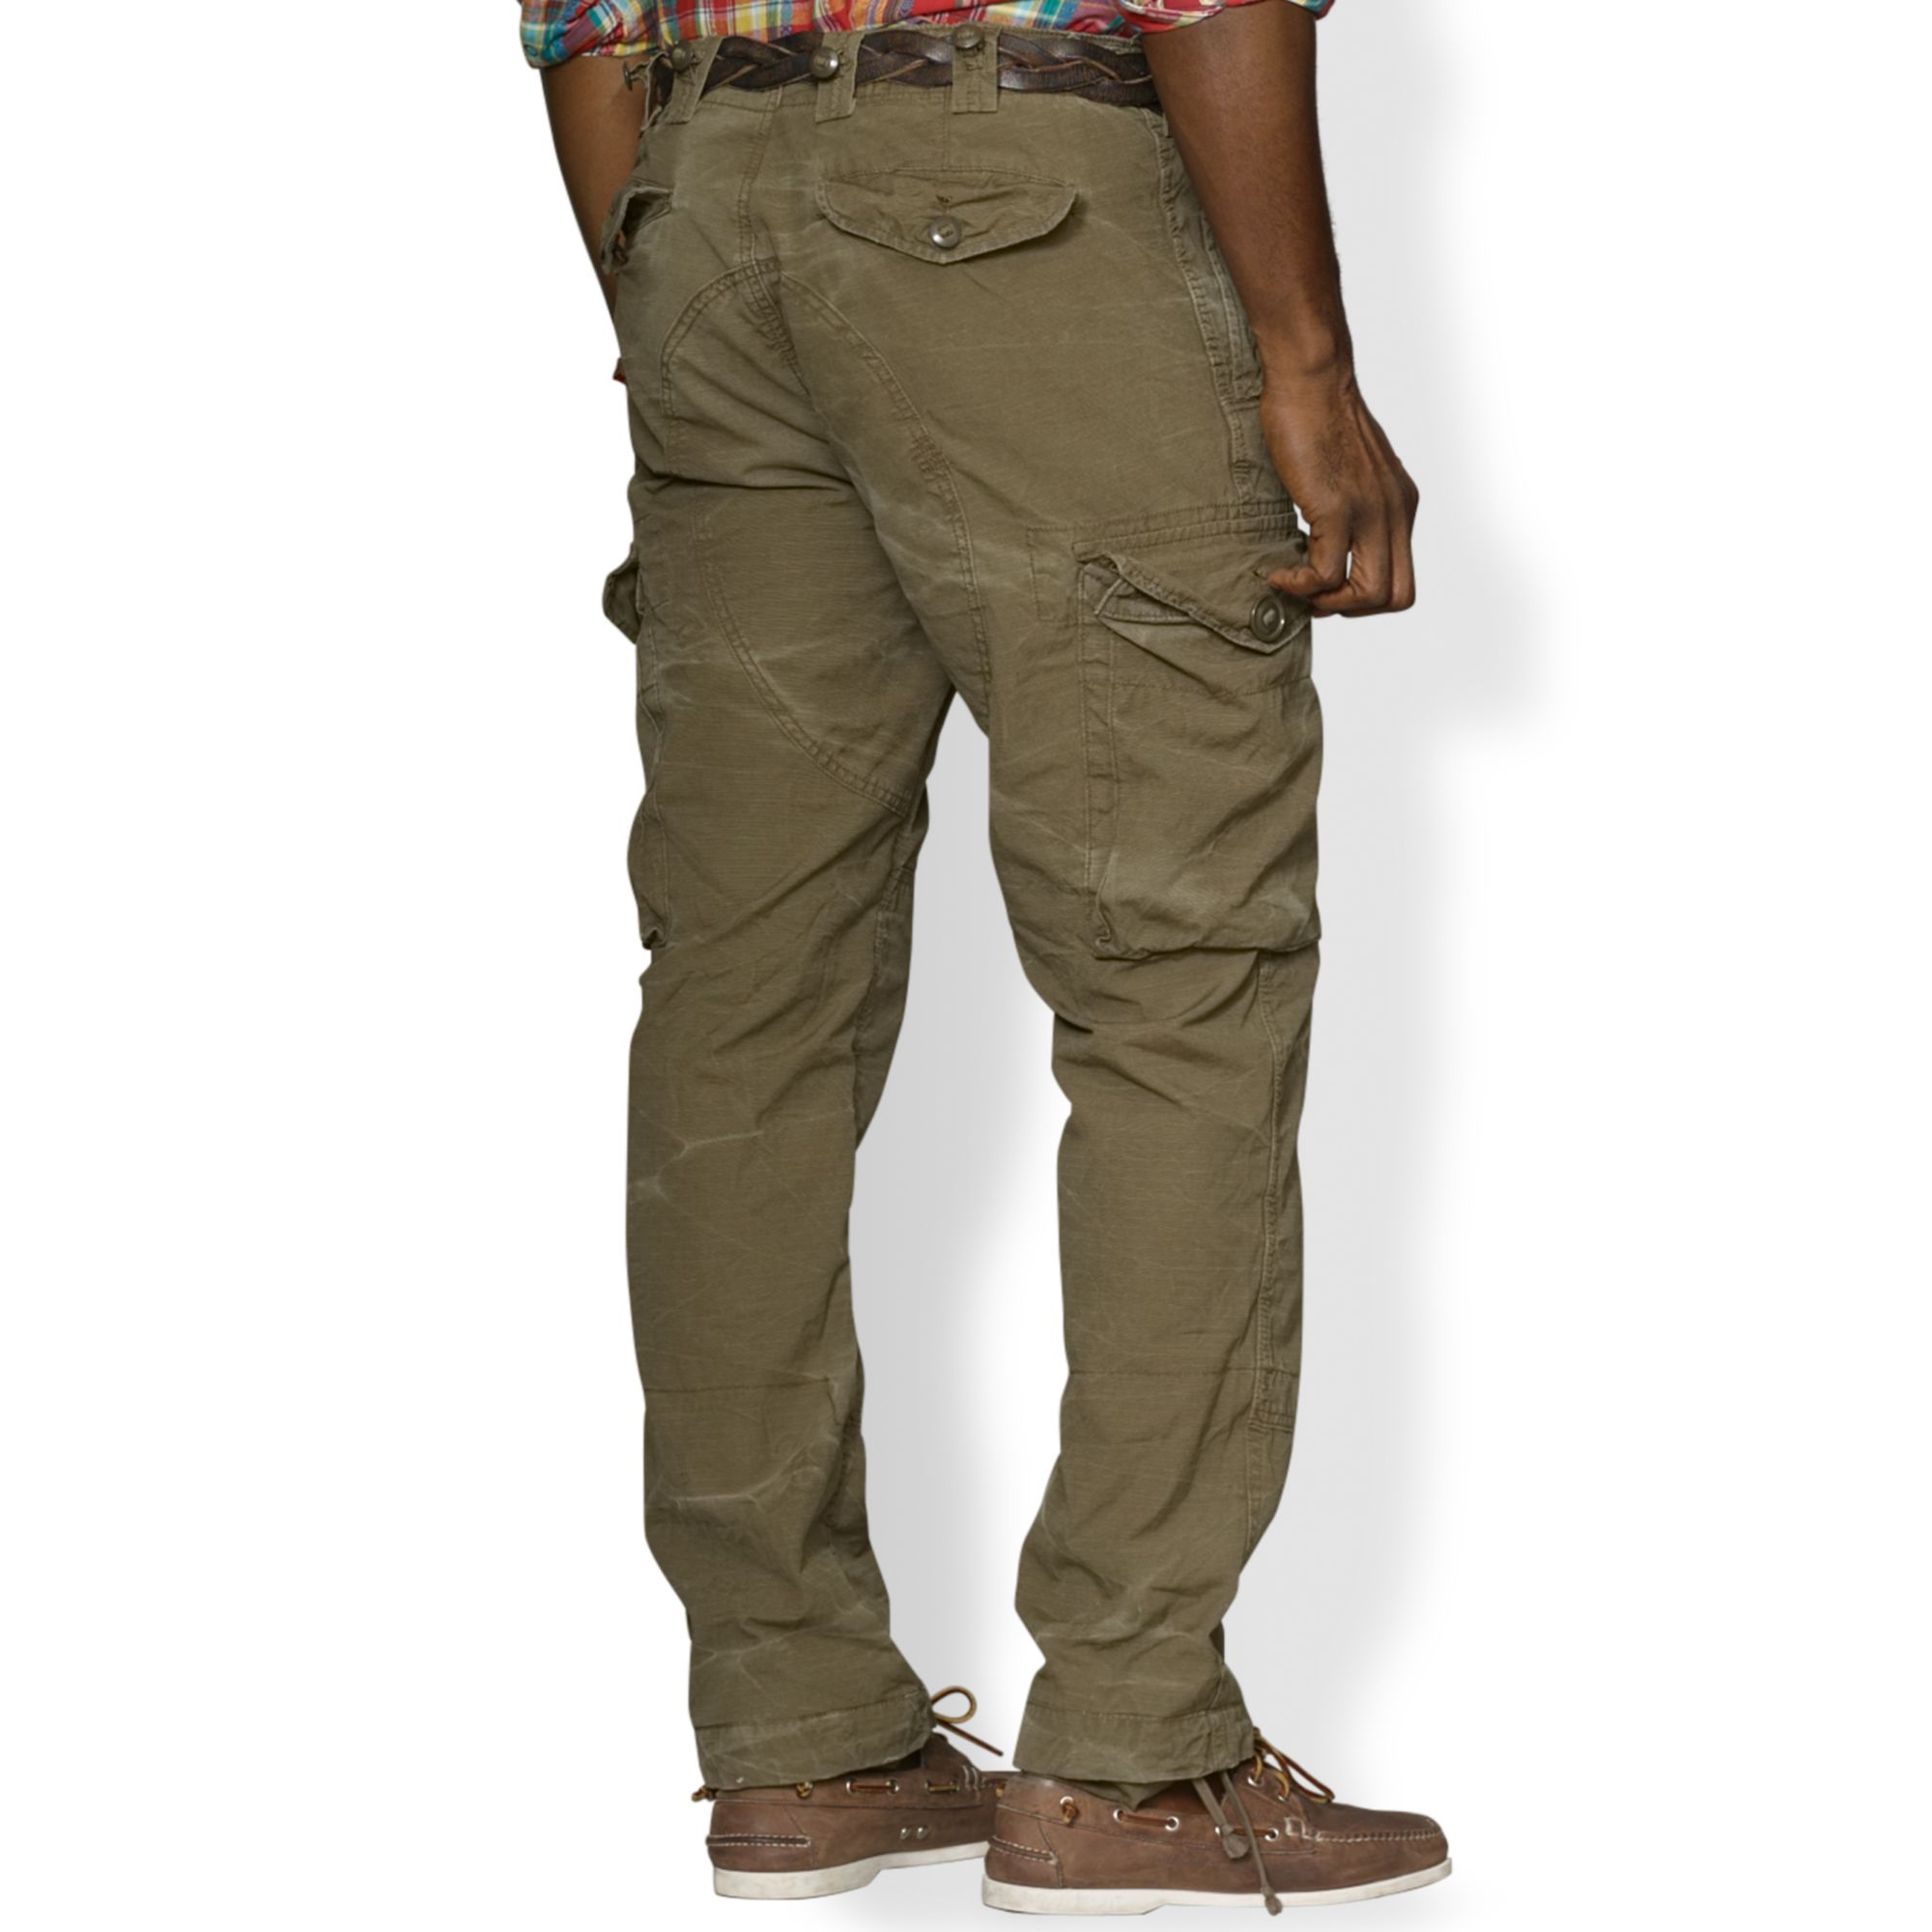 Lyst - Ralph lauren Polo Big and Tall Classicfit Canadian Ripstop Cargo ...